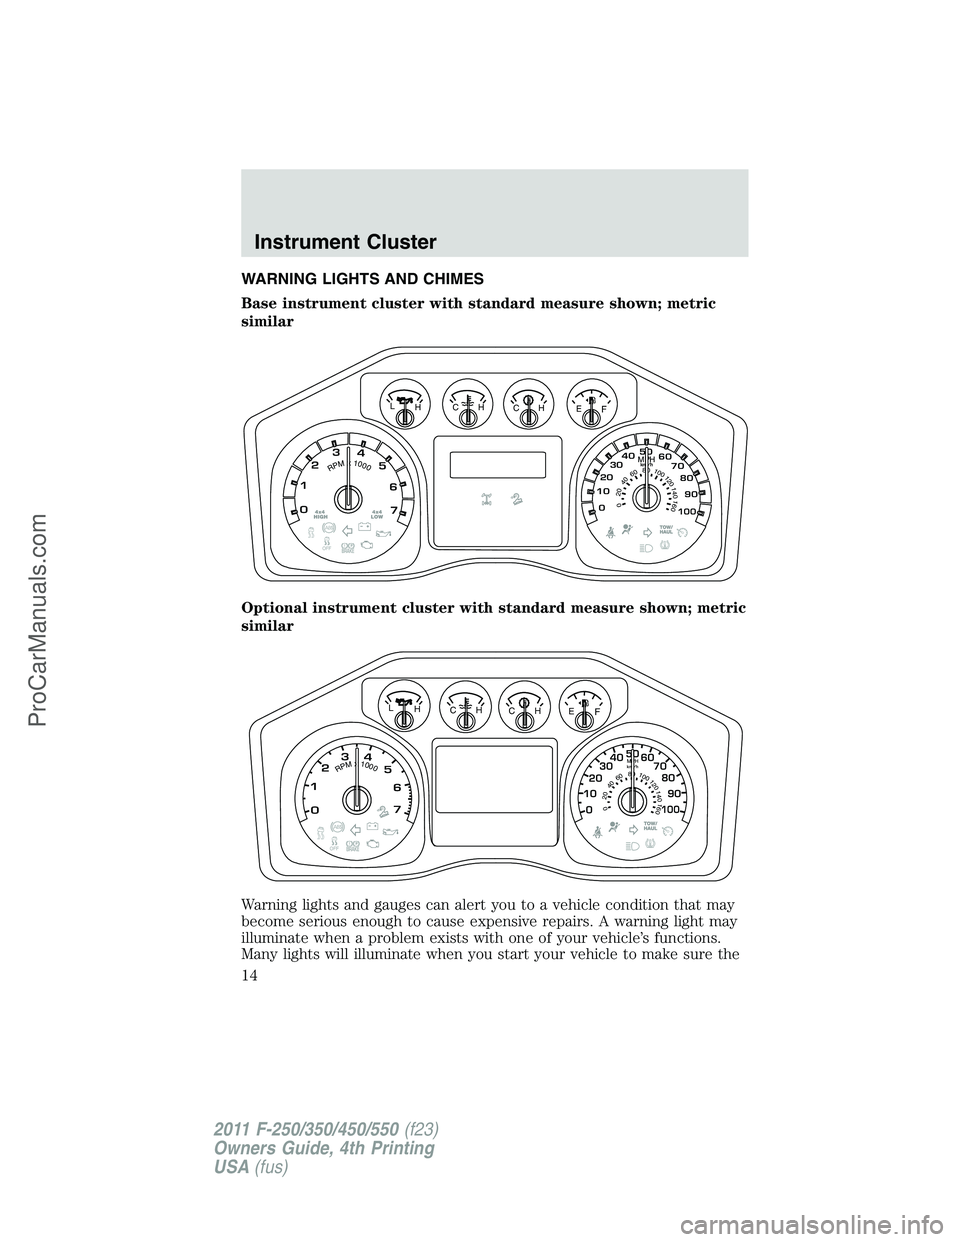 FORD F350 2011  Owners Manual WARNING LIGHTS AND CHIMES
Base instrument cluster with standard measure shown; metric
similar
Optional instrument cluster with standard measure shown; metric
similar
Warning lights and gauges can aler